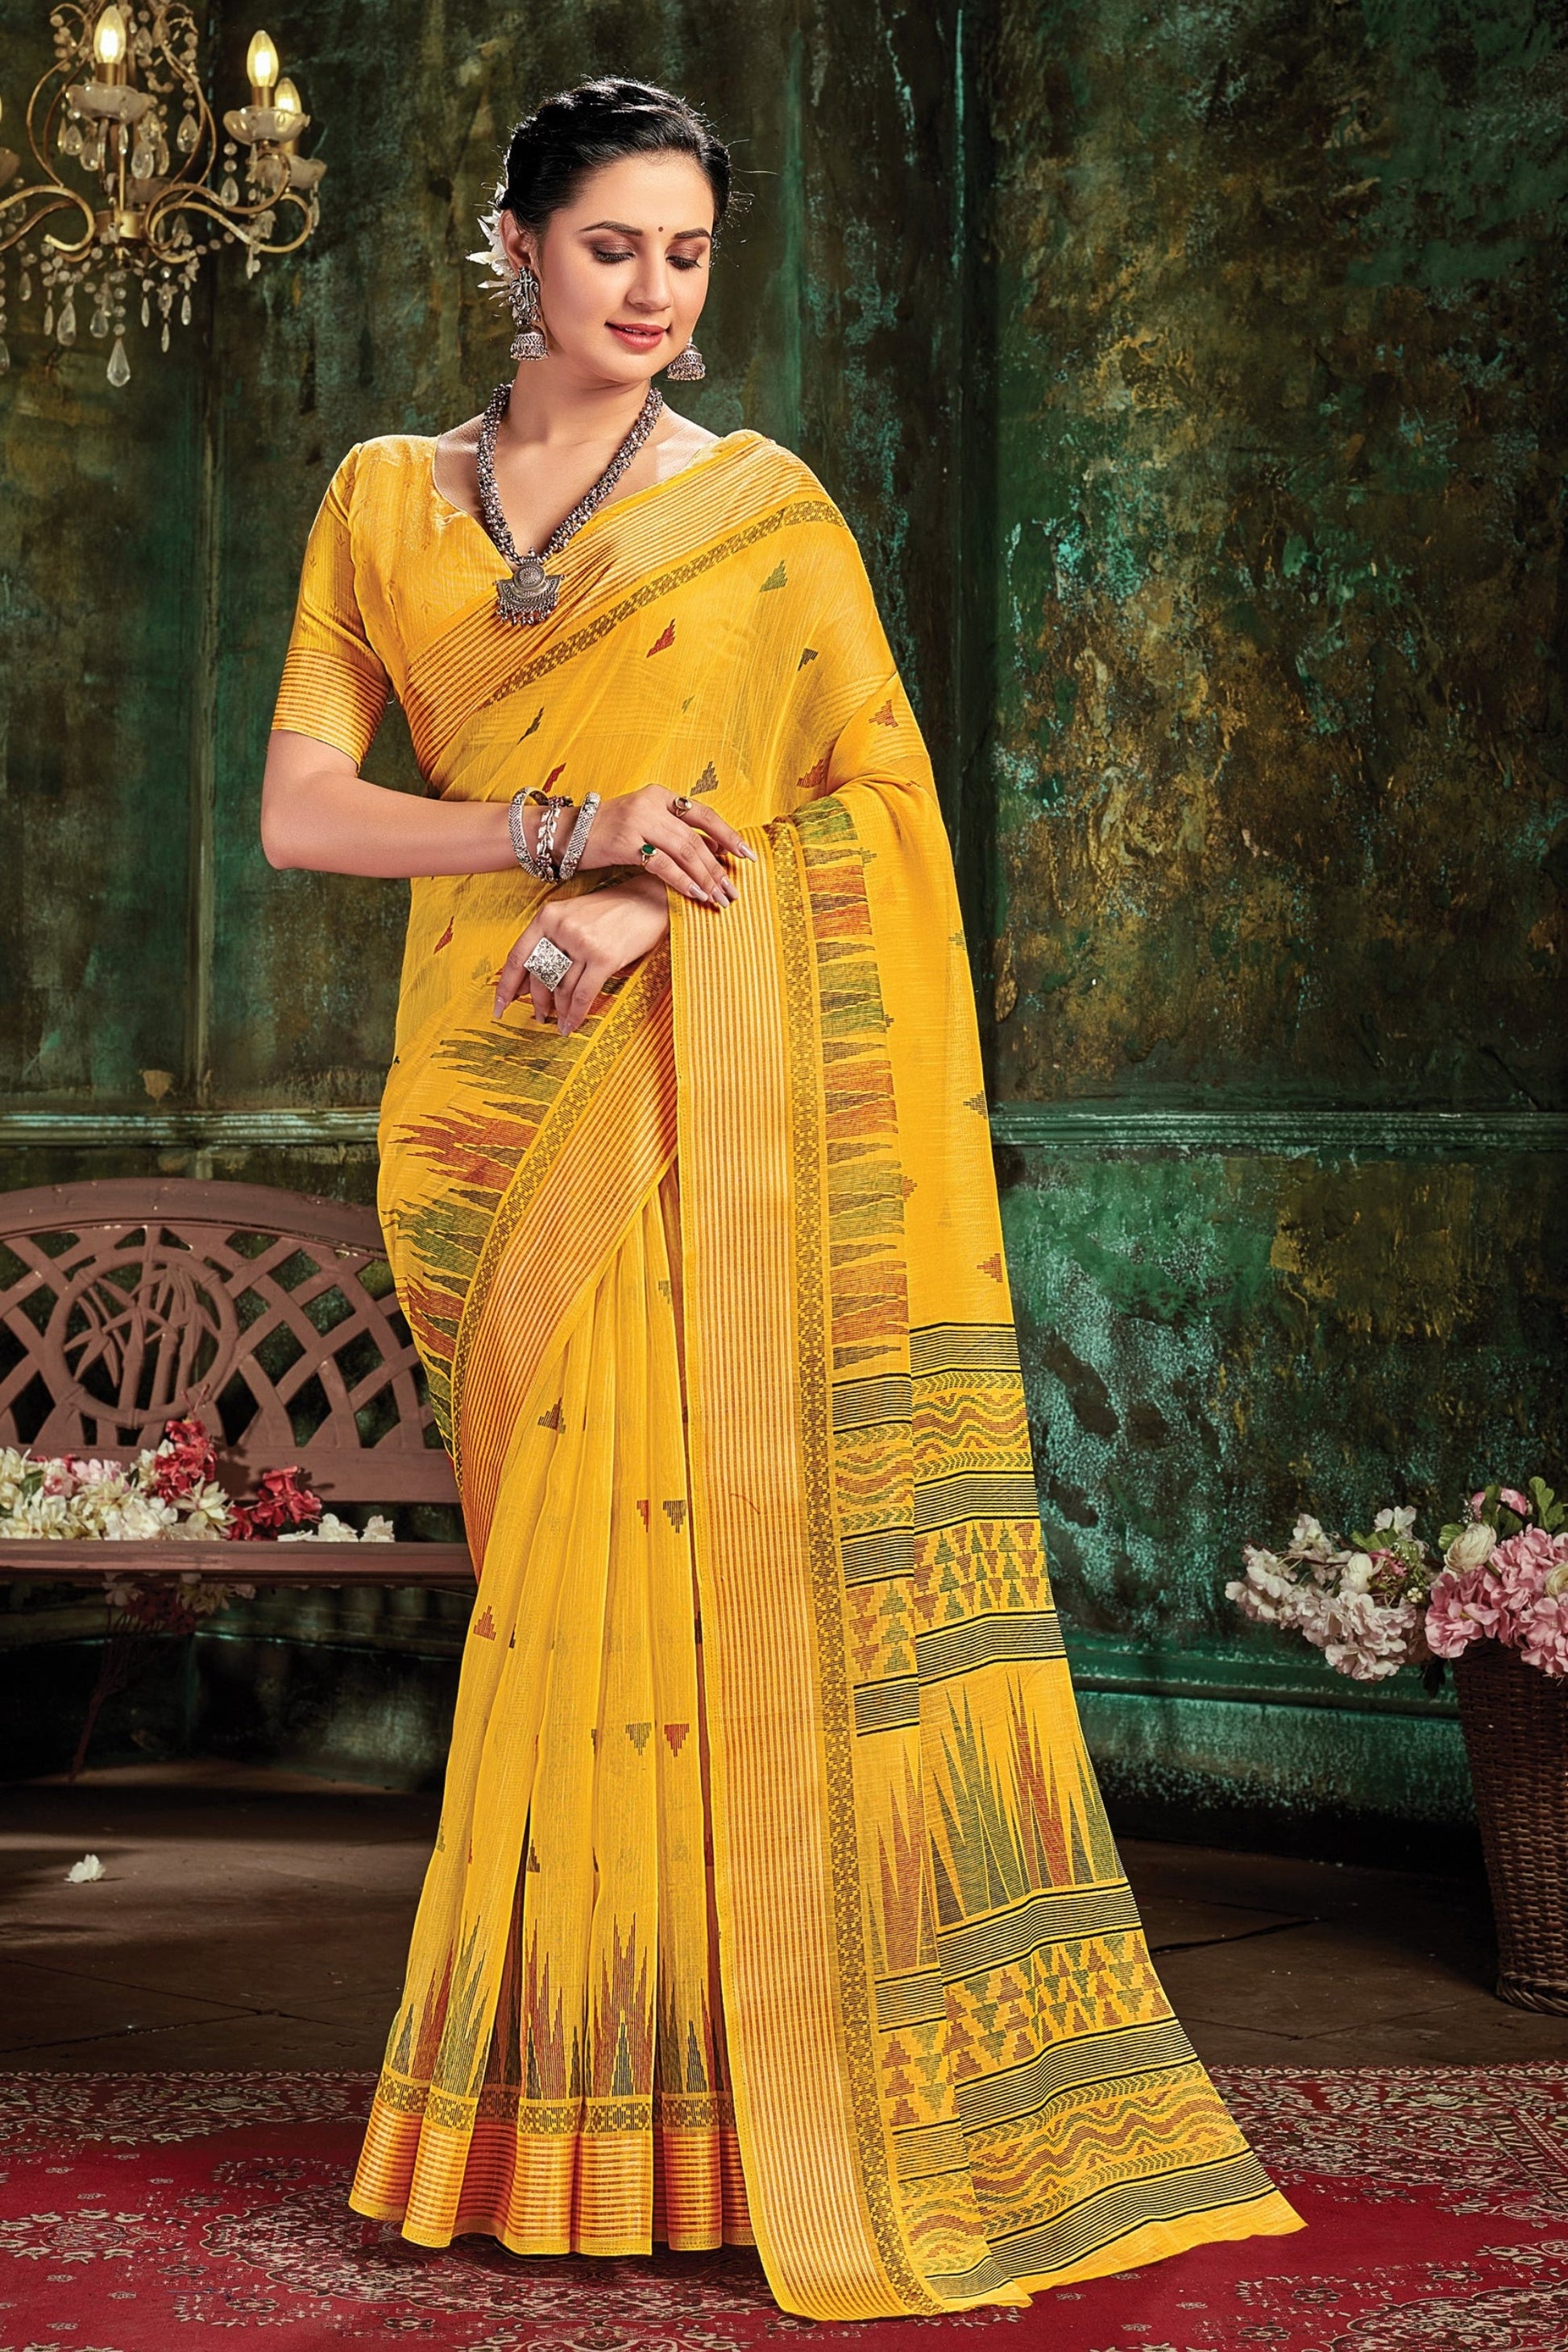 Gold Cotton Sarees with Blouse for Weddings | Indian Sari for Festival - Woven